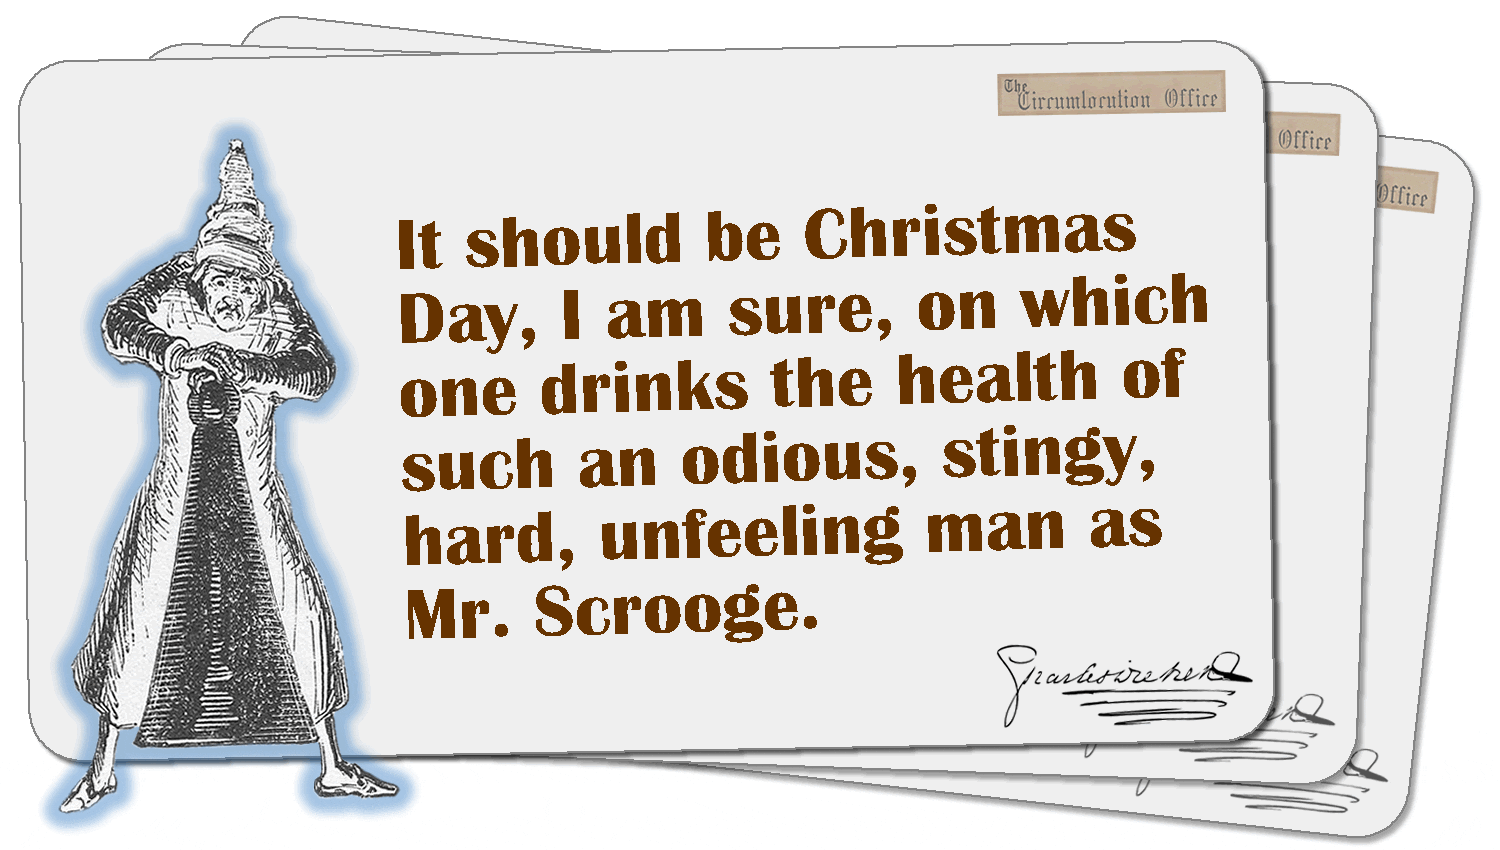 Quotations from A Christmas Carol, the short story by Charles Dickens.